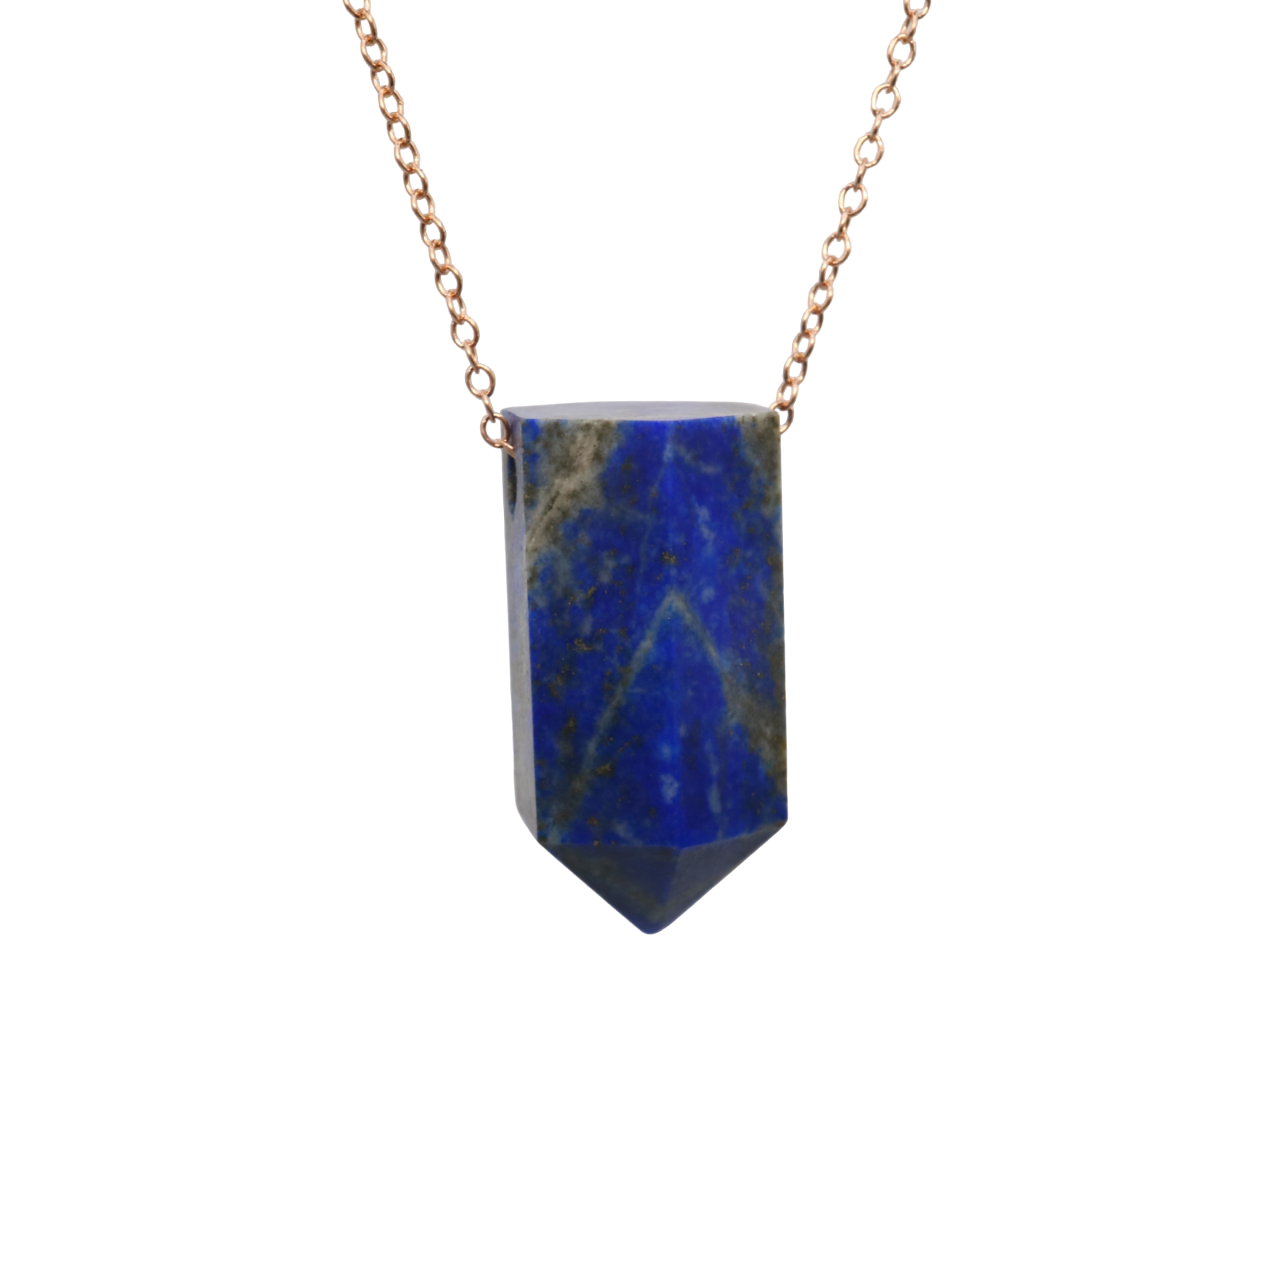 Lapis Lazuli on a fine Rose Gold plated 925 Sterling Silver chain